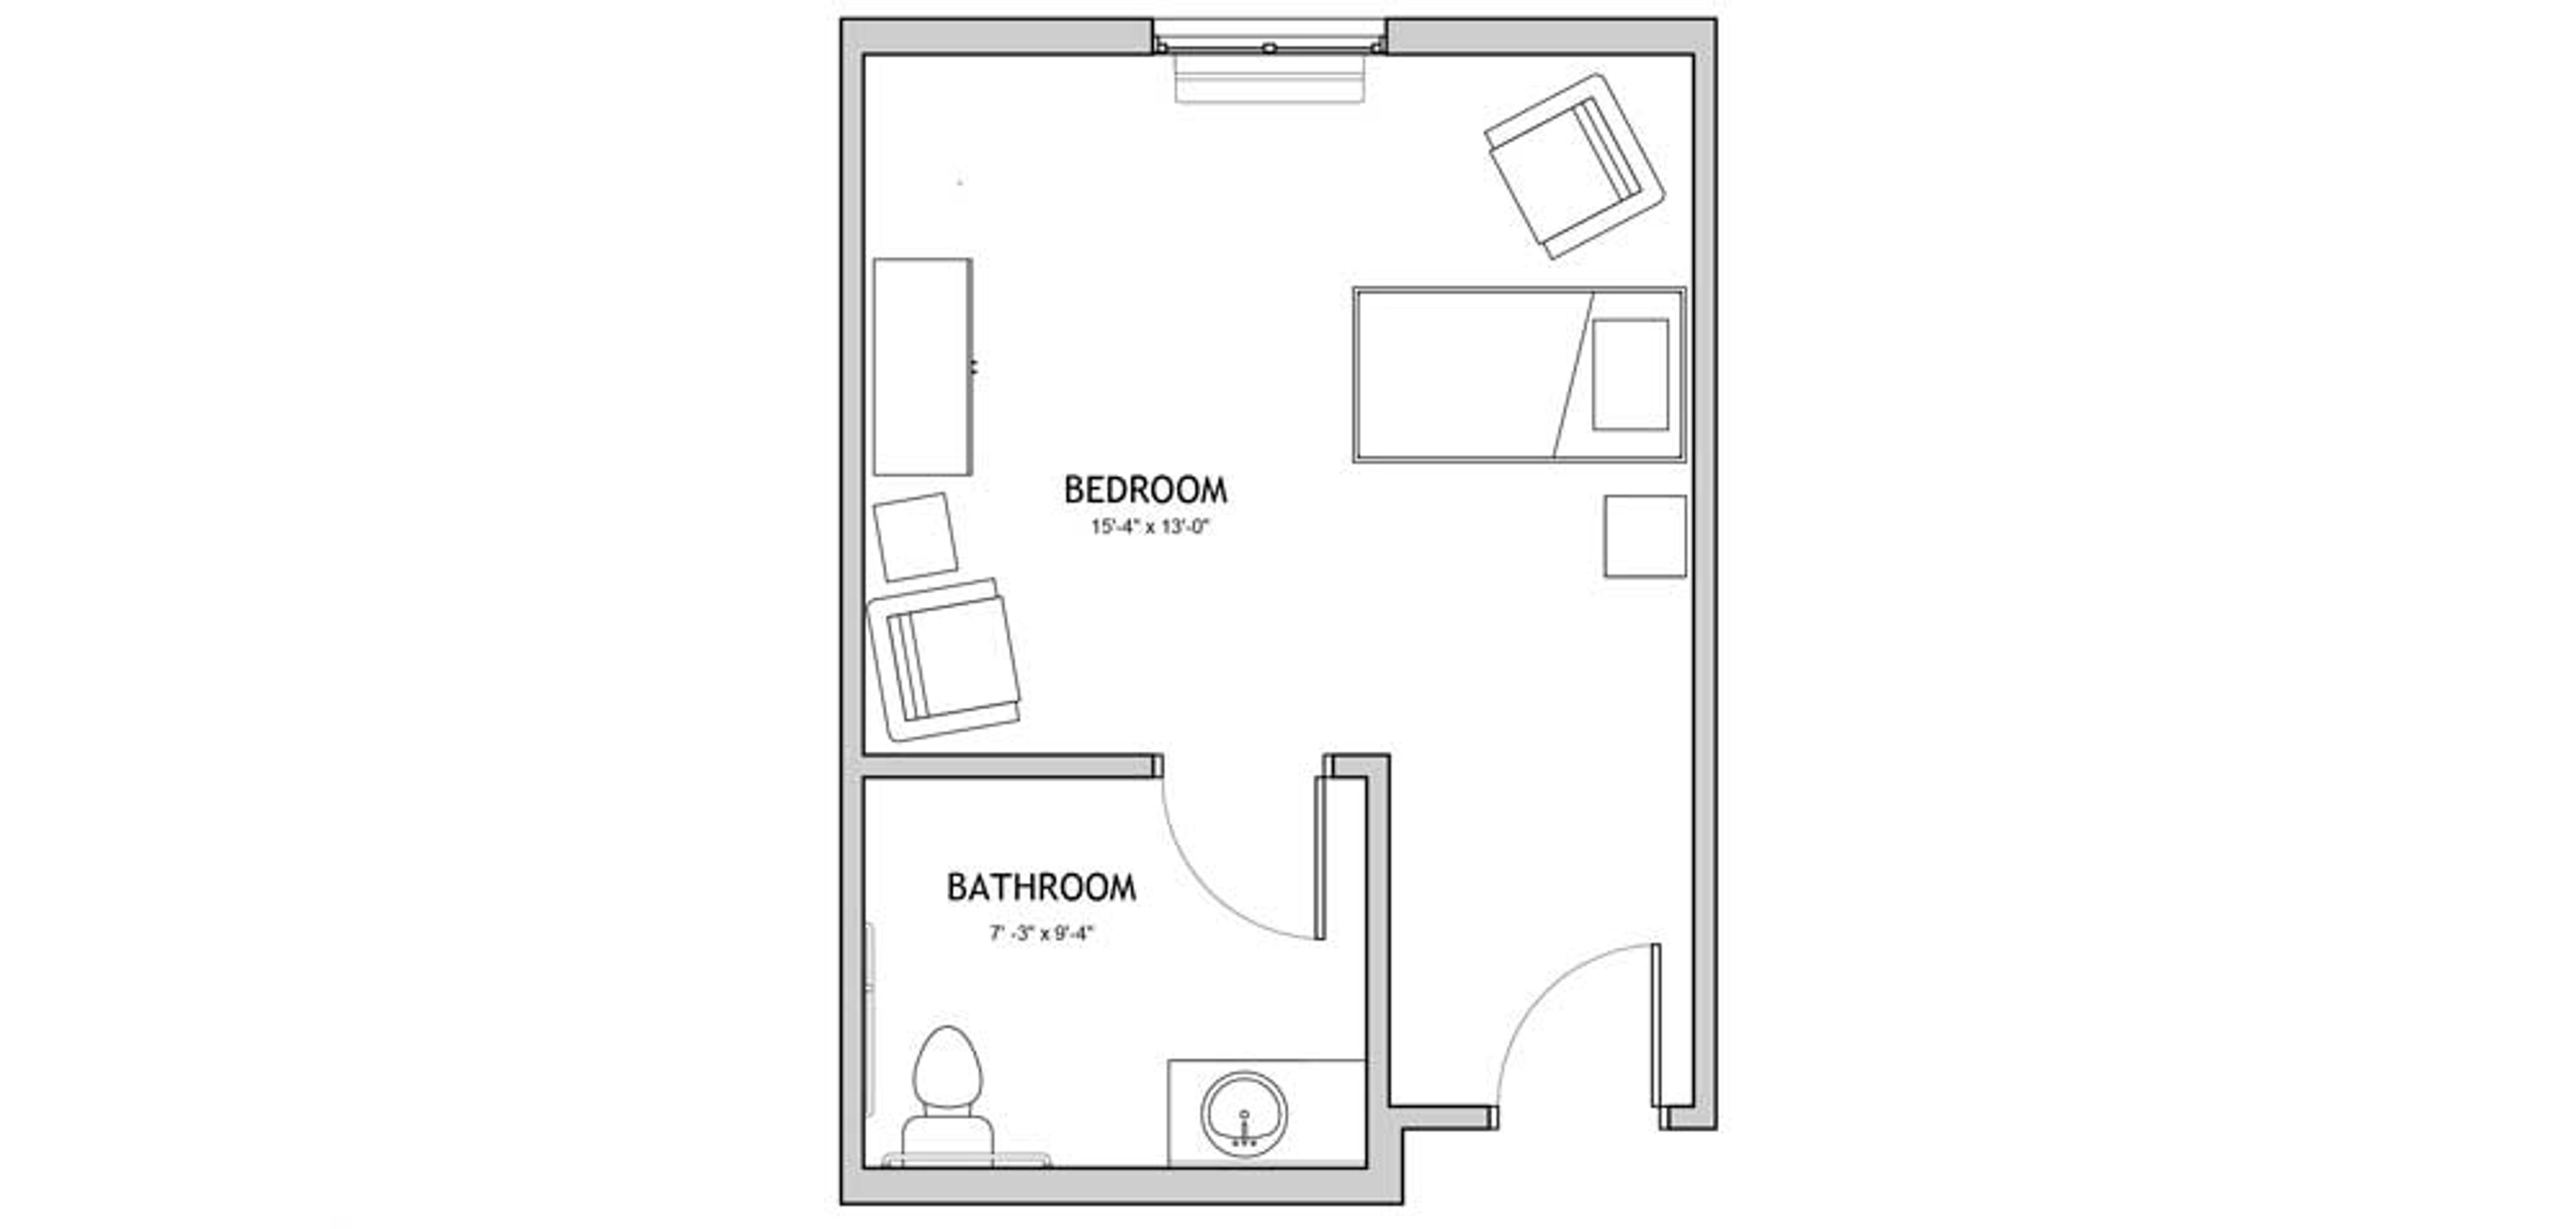 Floorplan - The Auberge at Plano - 1 bed, 1 bath, 340 sq. ft. Memory Care